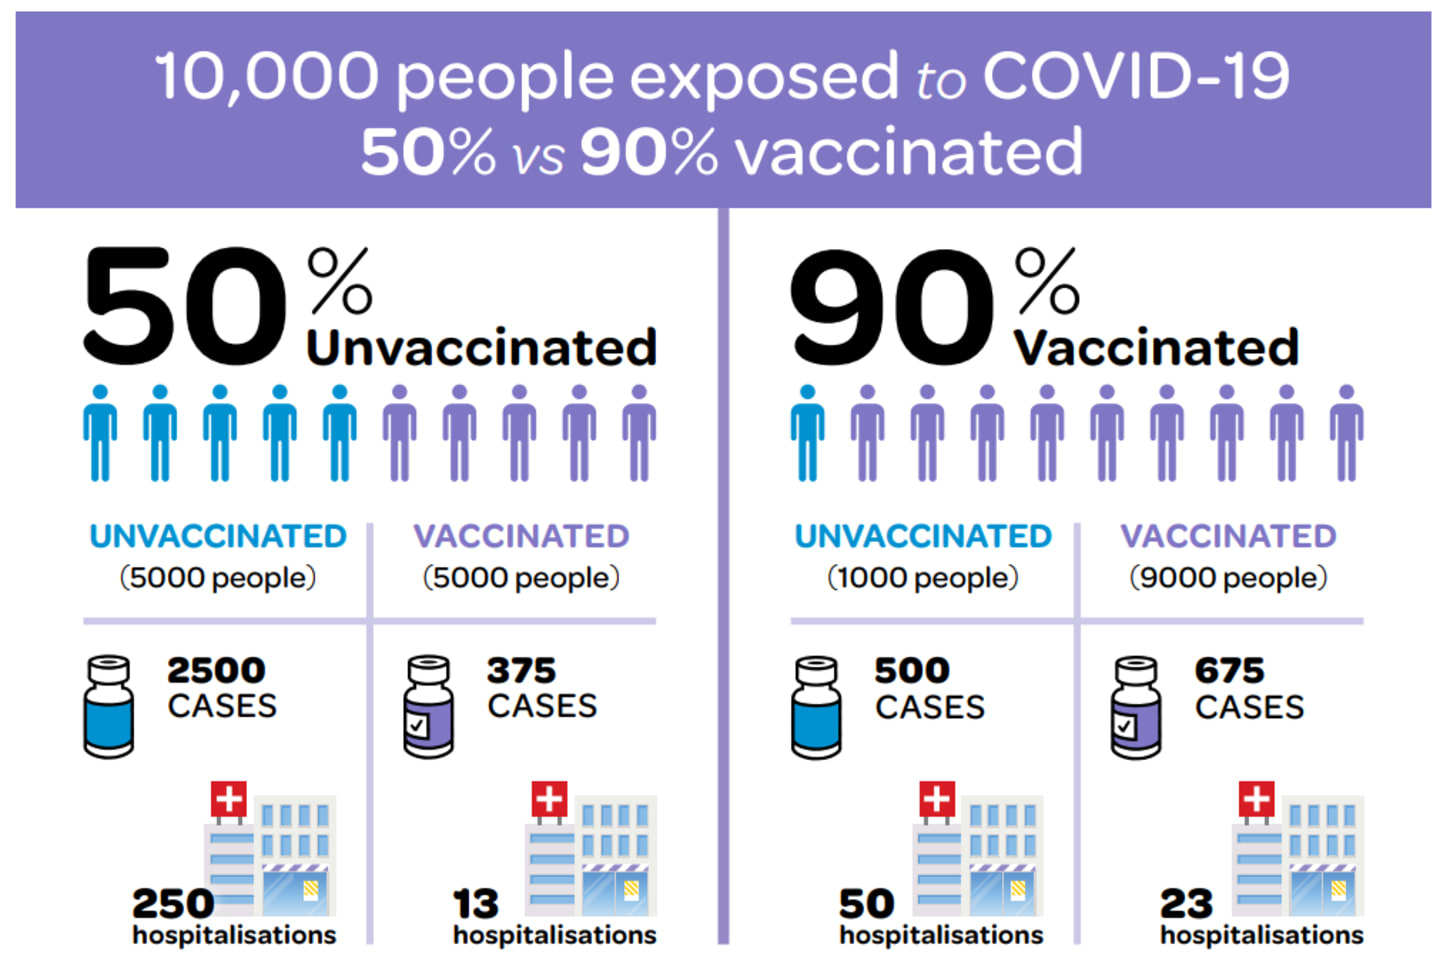 Comparison of case numbers and hospitalisations at different levels of vaccination.